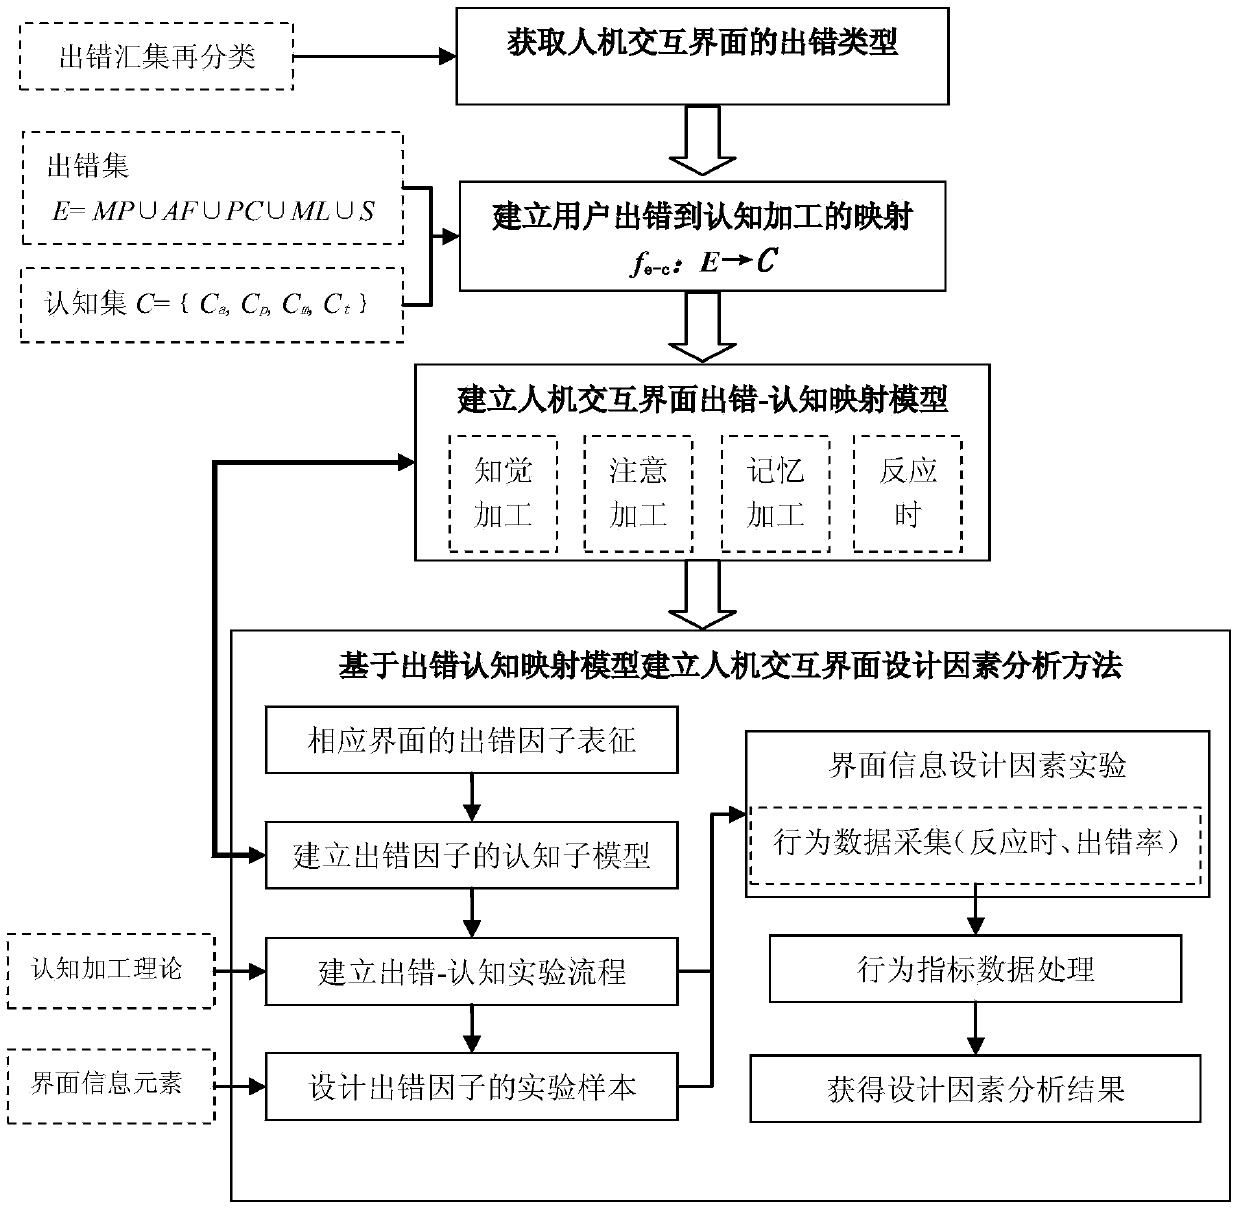 Human-computer interaction interface design method based on error-cognition mapping model